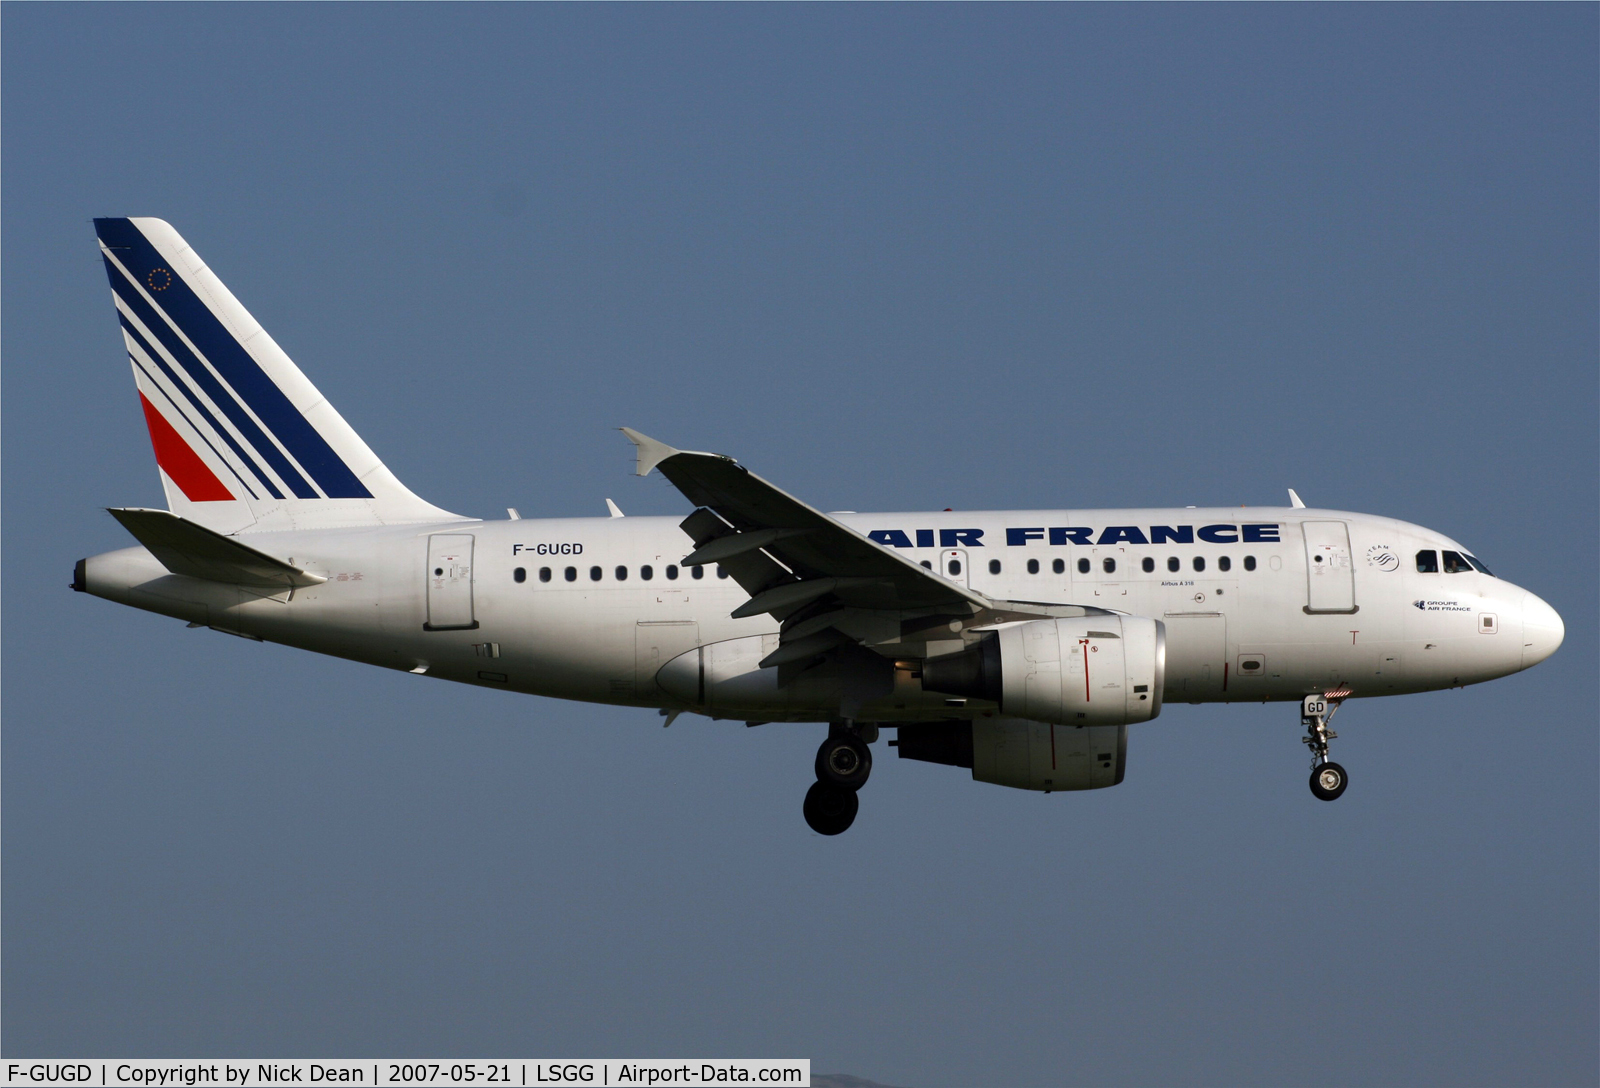 F-GUGD, 2003 Airbus A318-111 C/N 2081, LSGG